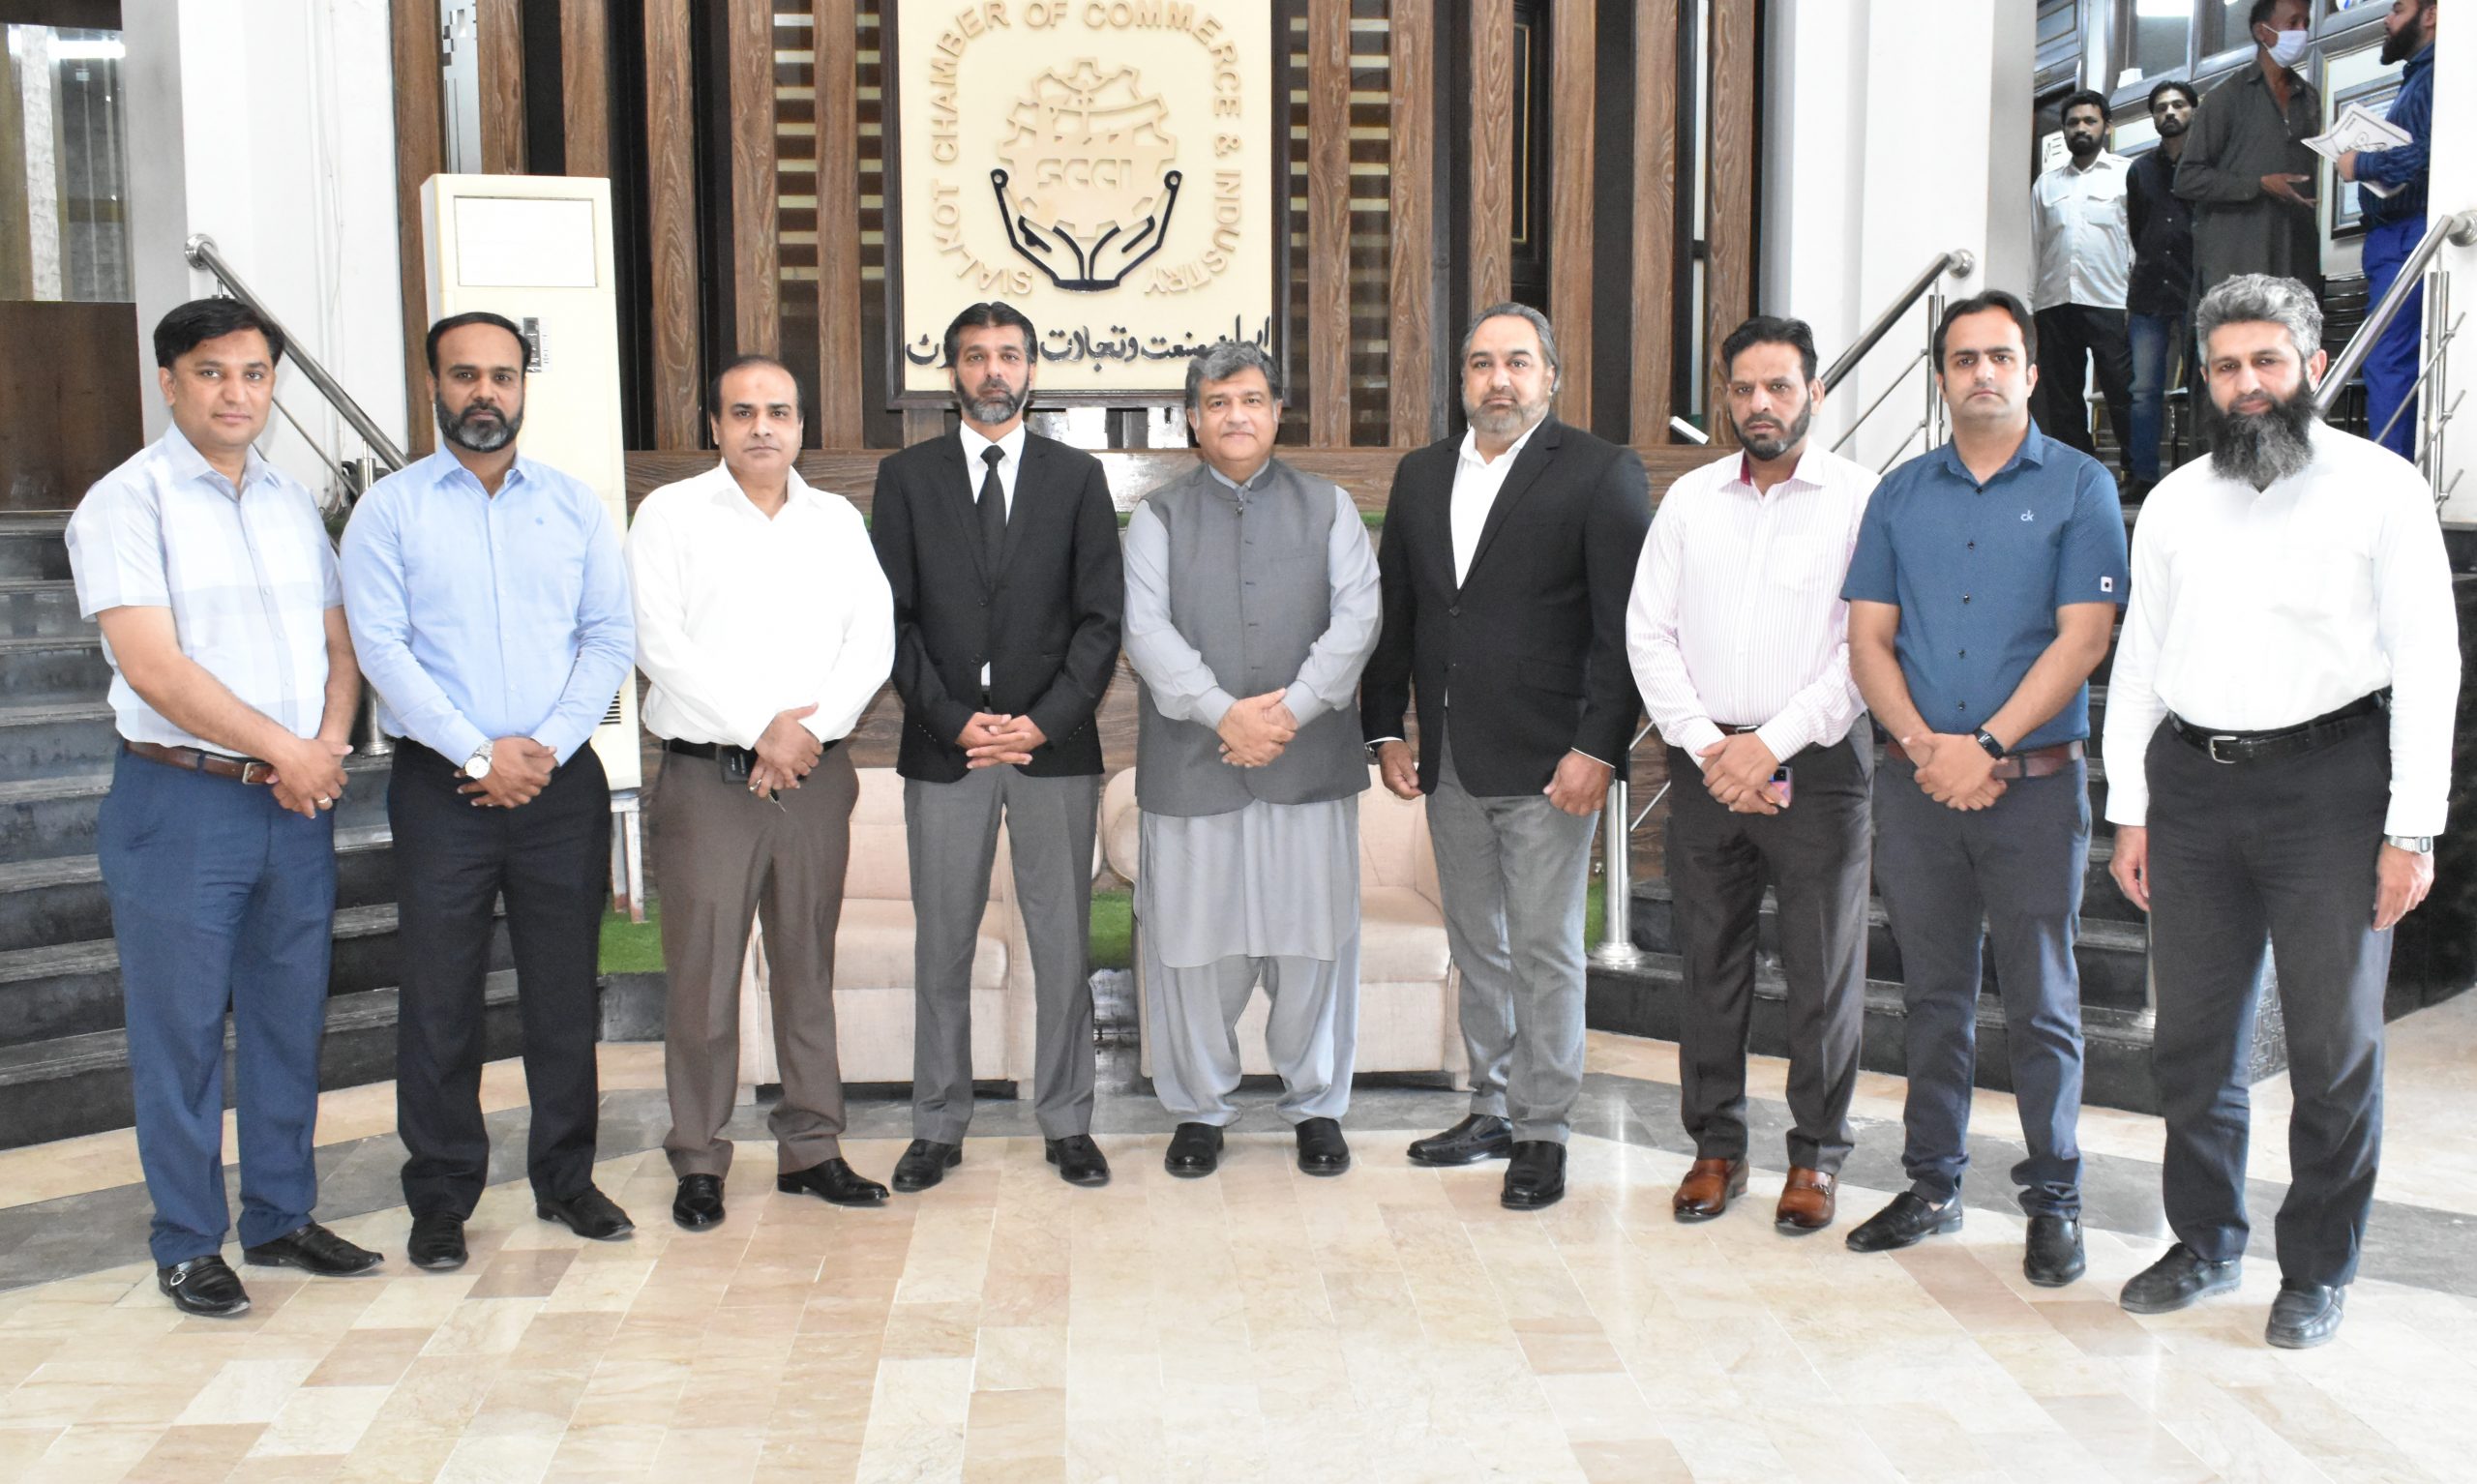 Mr. Muhammad Tafheem Ijaz Khan, Newly elected President of the Sialkot Tax Bar Association visited the Sialkot Chamber of Commerce & Industry on April 23, 2022. Mian Imran Akbar, President, Sialkot Chamber extended his heartiest felicitations to Mr. Muhammad Tafheem Ijaz Khan and assured his full support in areas of mutual cooperation and future collaborations.